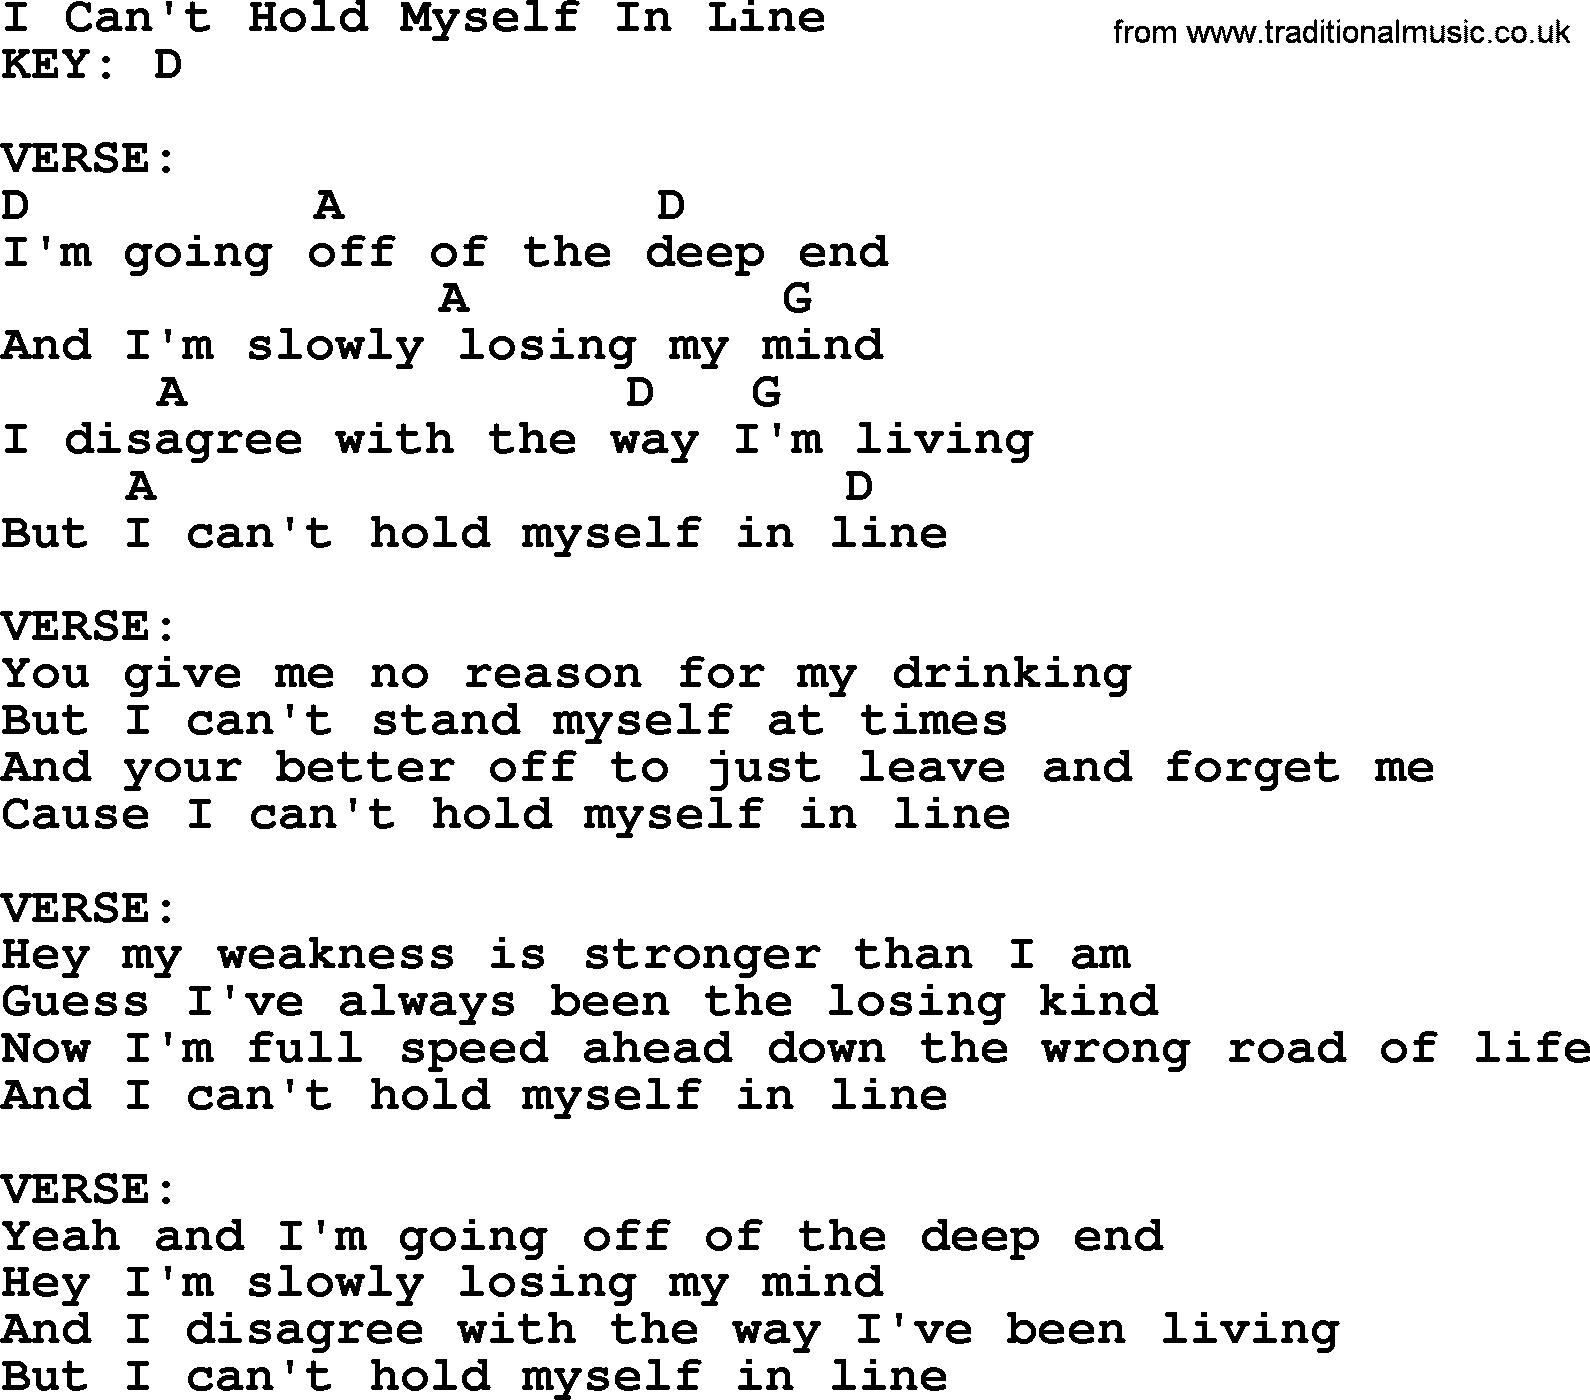 Merle Haggard song: I Can't Hold Myself In Line, lyrics and chords